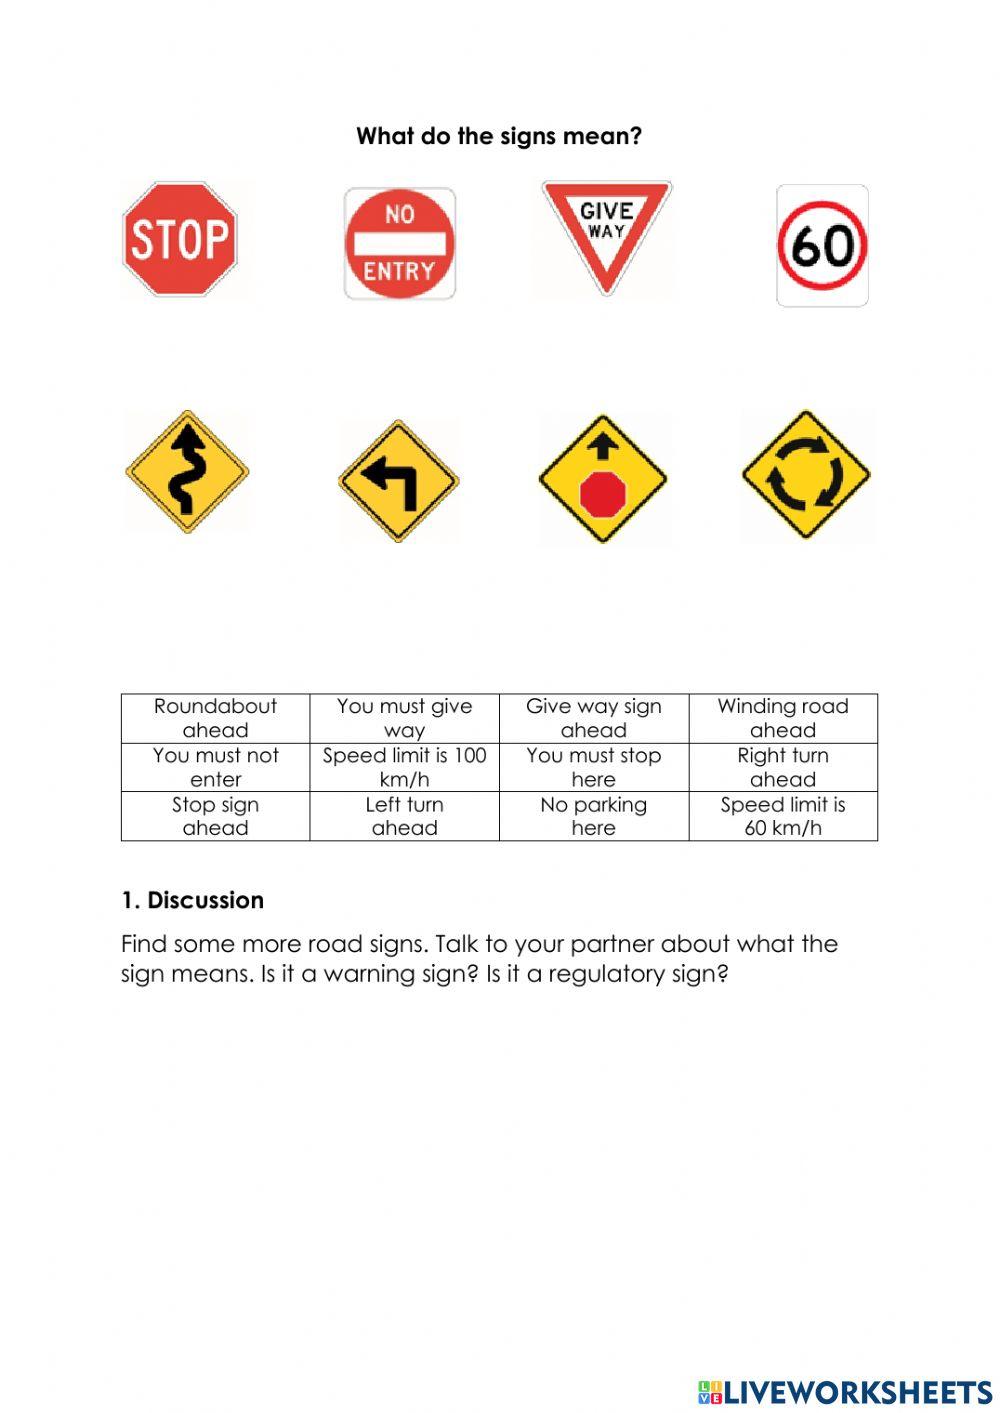 What do the road signs mean